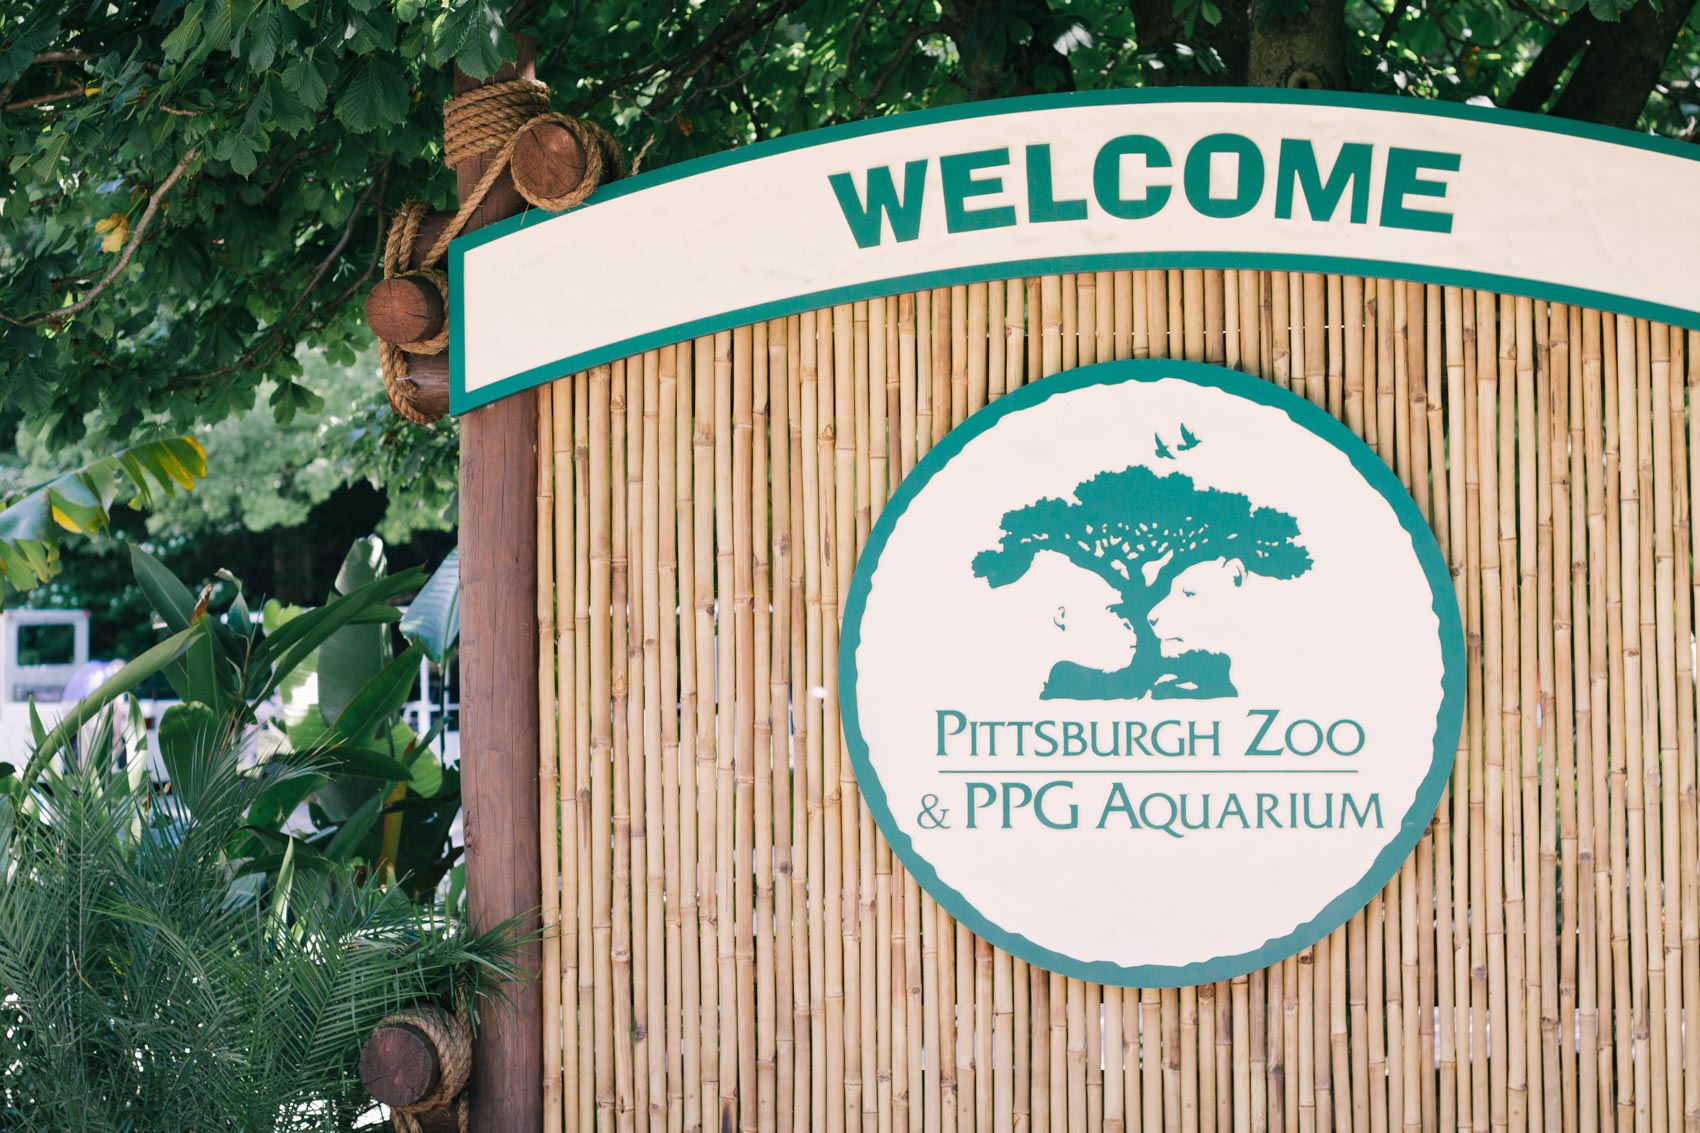 Blogging couple Allyn Lewis and Shaun Novak take you inside their day at the Pittsburgh Zoo, an essnetial summer bucket list item!